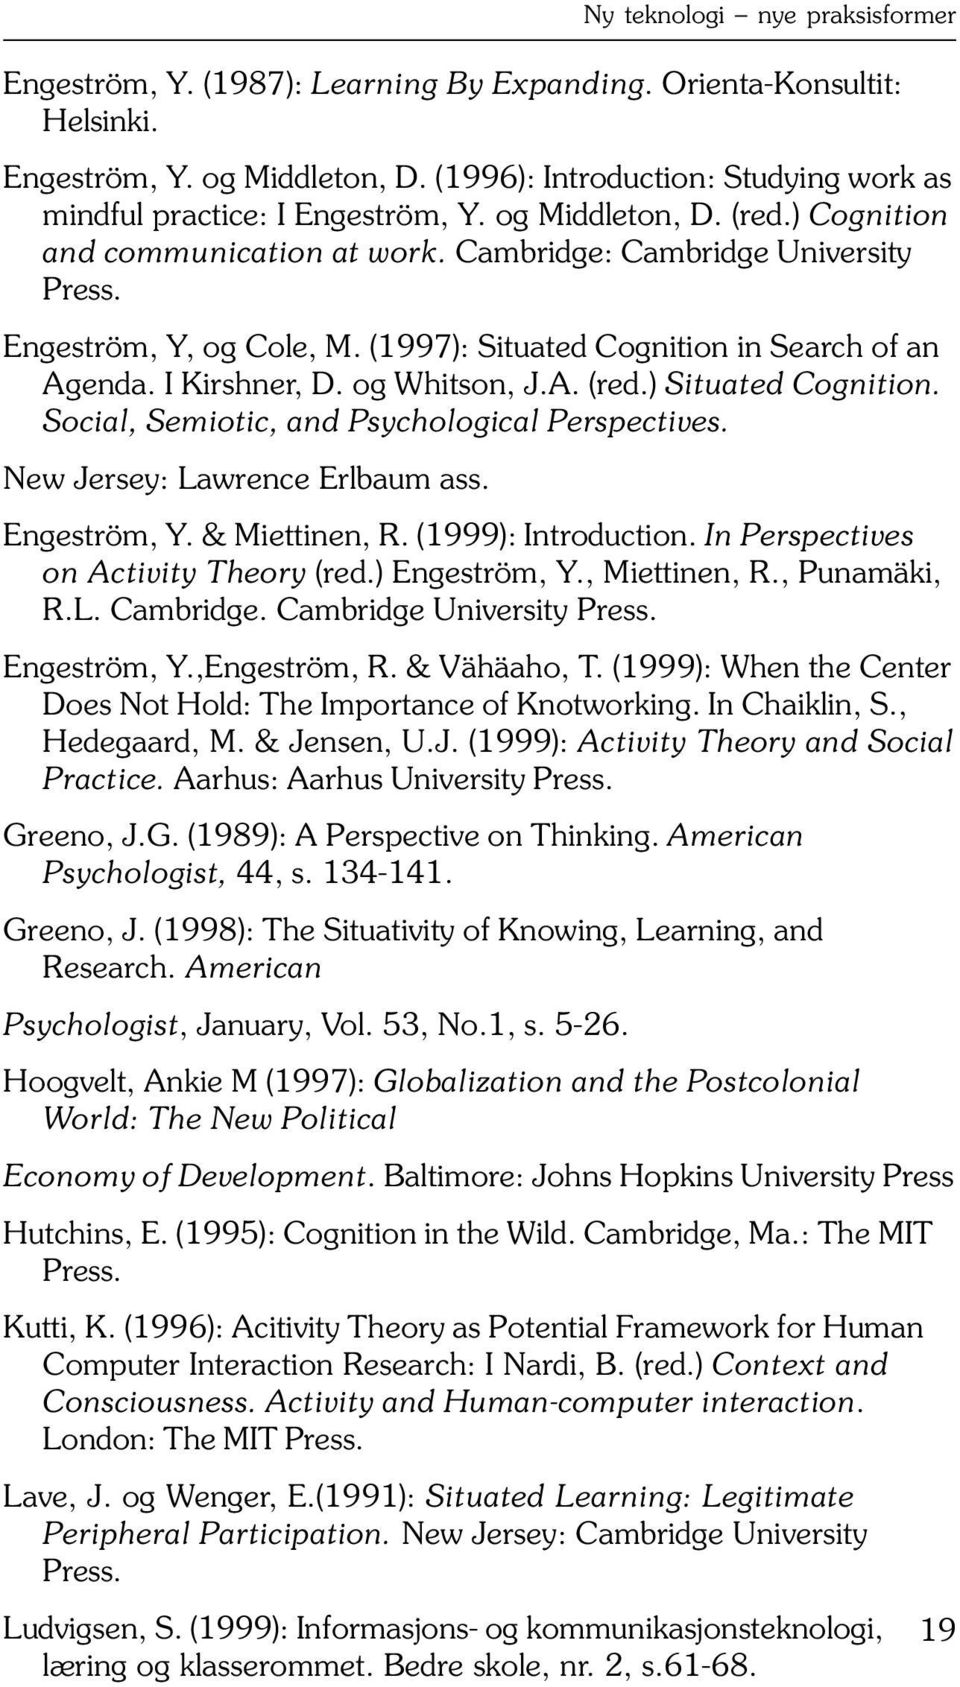 ) Situated Cognition. Social, Semiotic, and Psychological Perspectives. New Jersey: Lawrence Erlbaum ass. Engeström, Y. & Miettinen, R. (1999): Introduction. In Perspectives on Activity Theory (red.